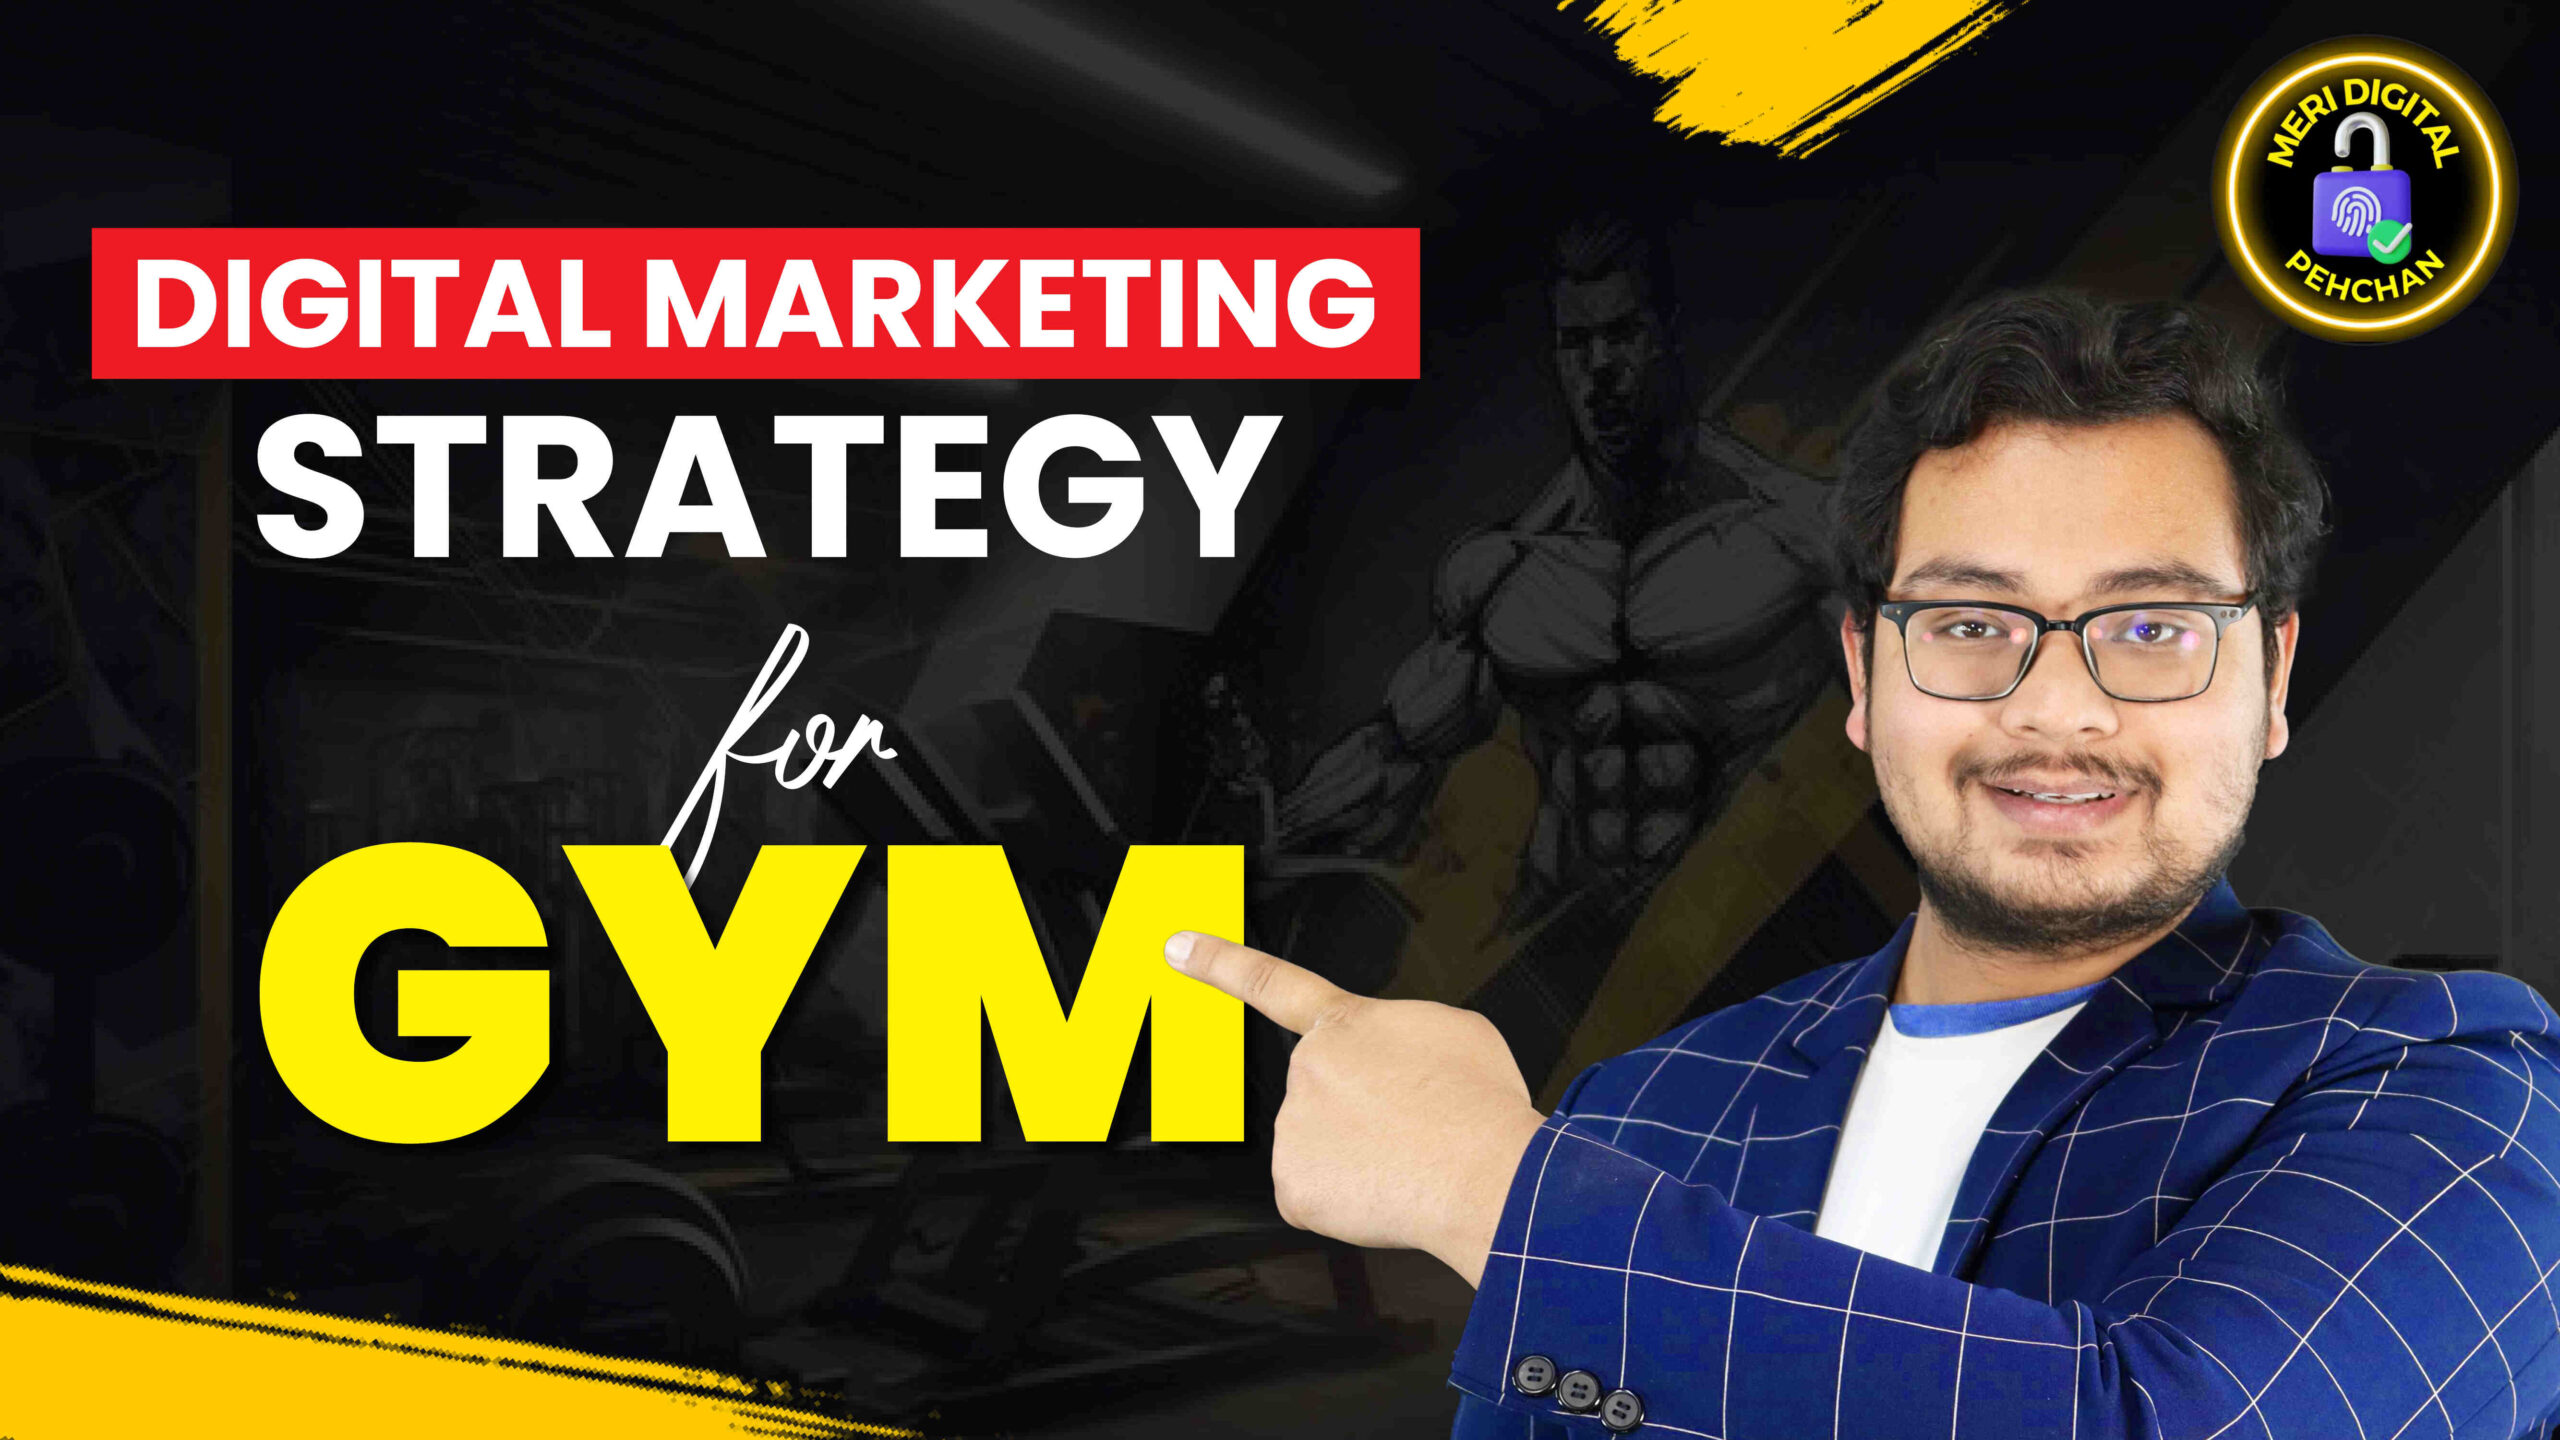 Digital Marketing Strategy for Fitness Trainers and Gyms